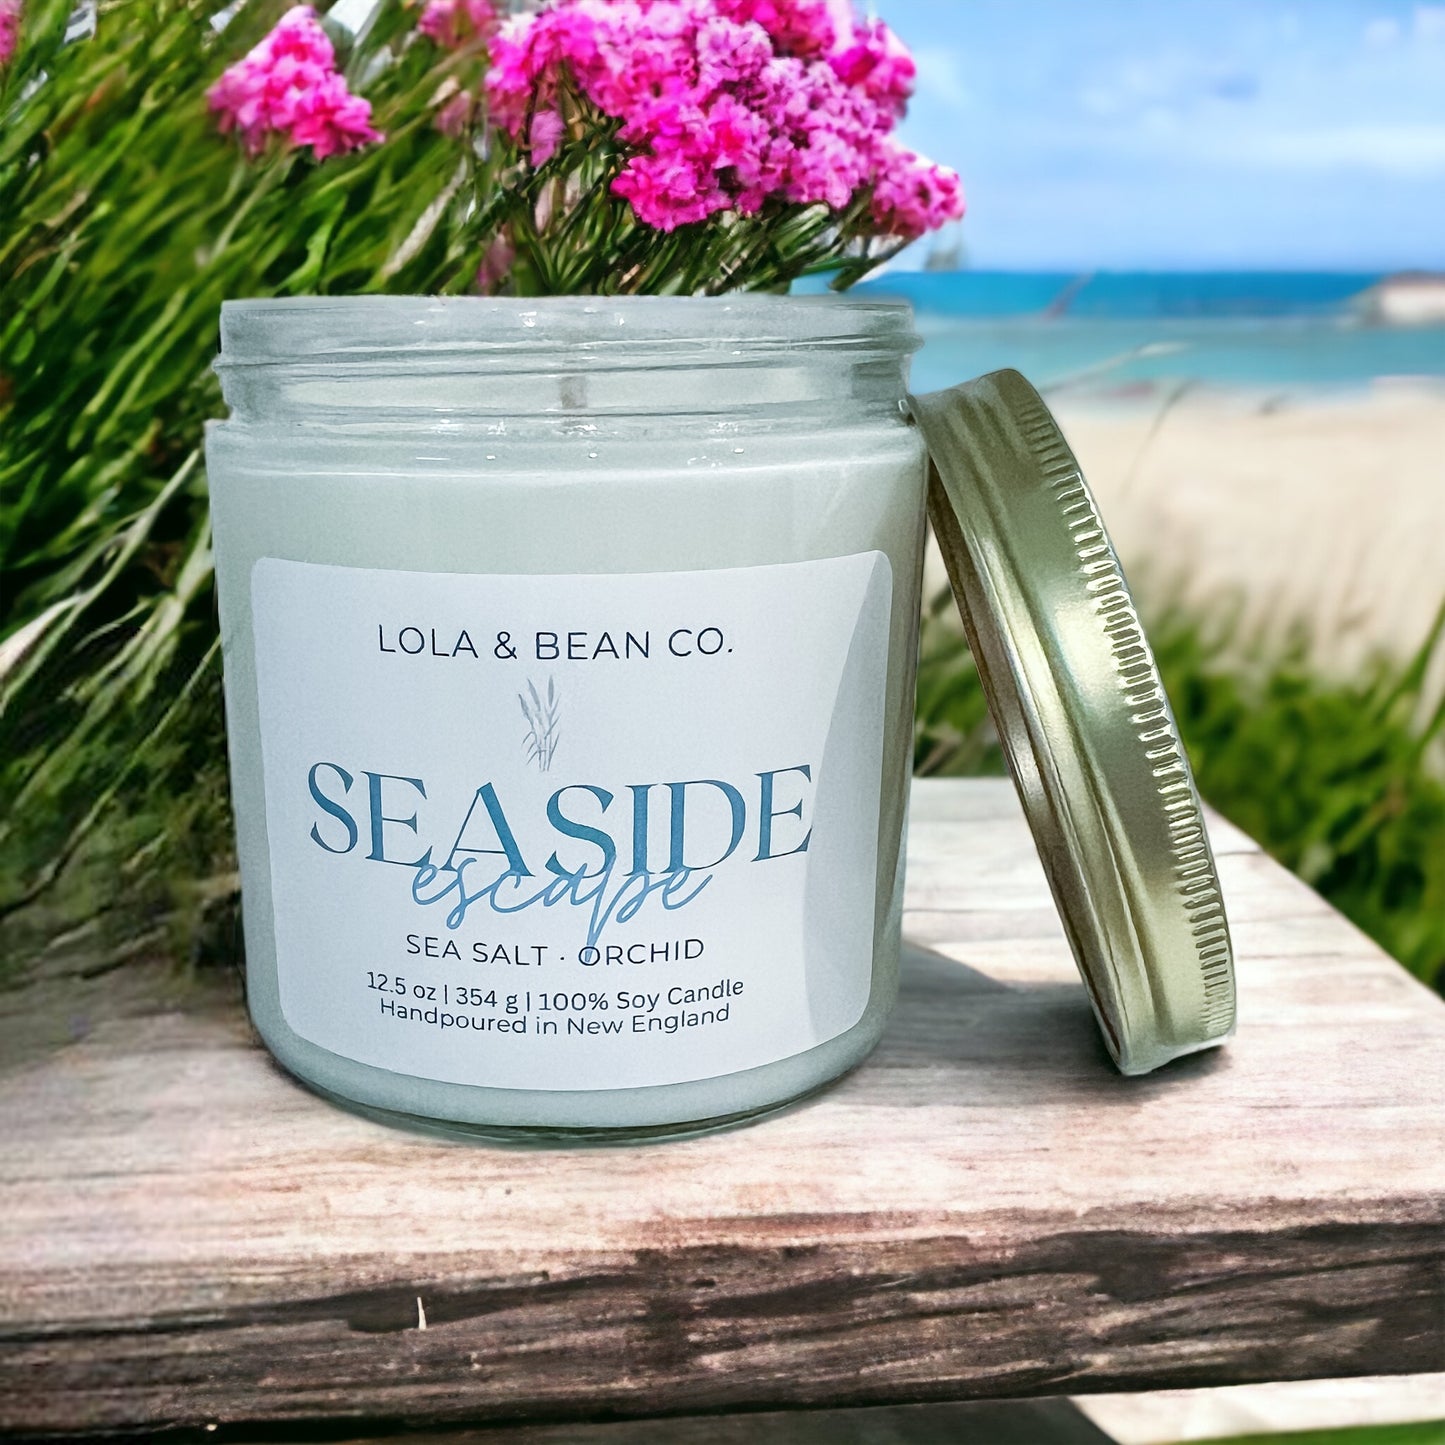 Seaside Escape Soy Candle